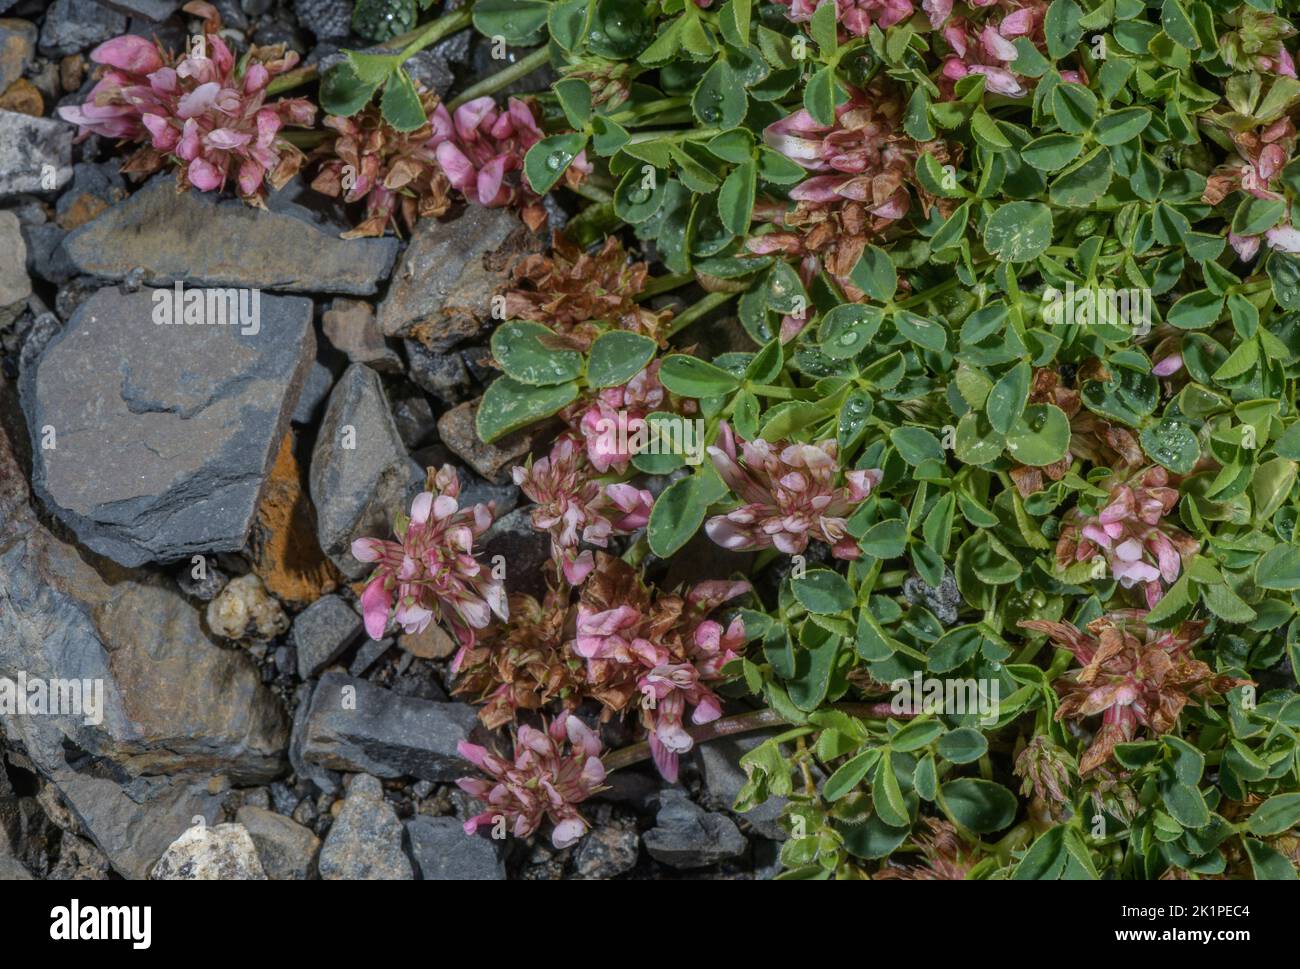 Mat of Thal's Clover, Trifolium thalii, in flower on roadside. Stock Photo